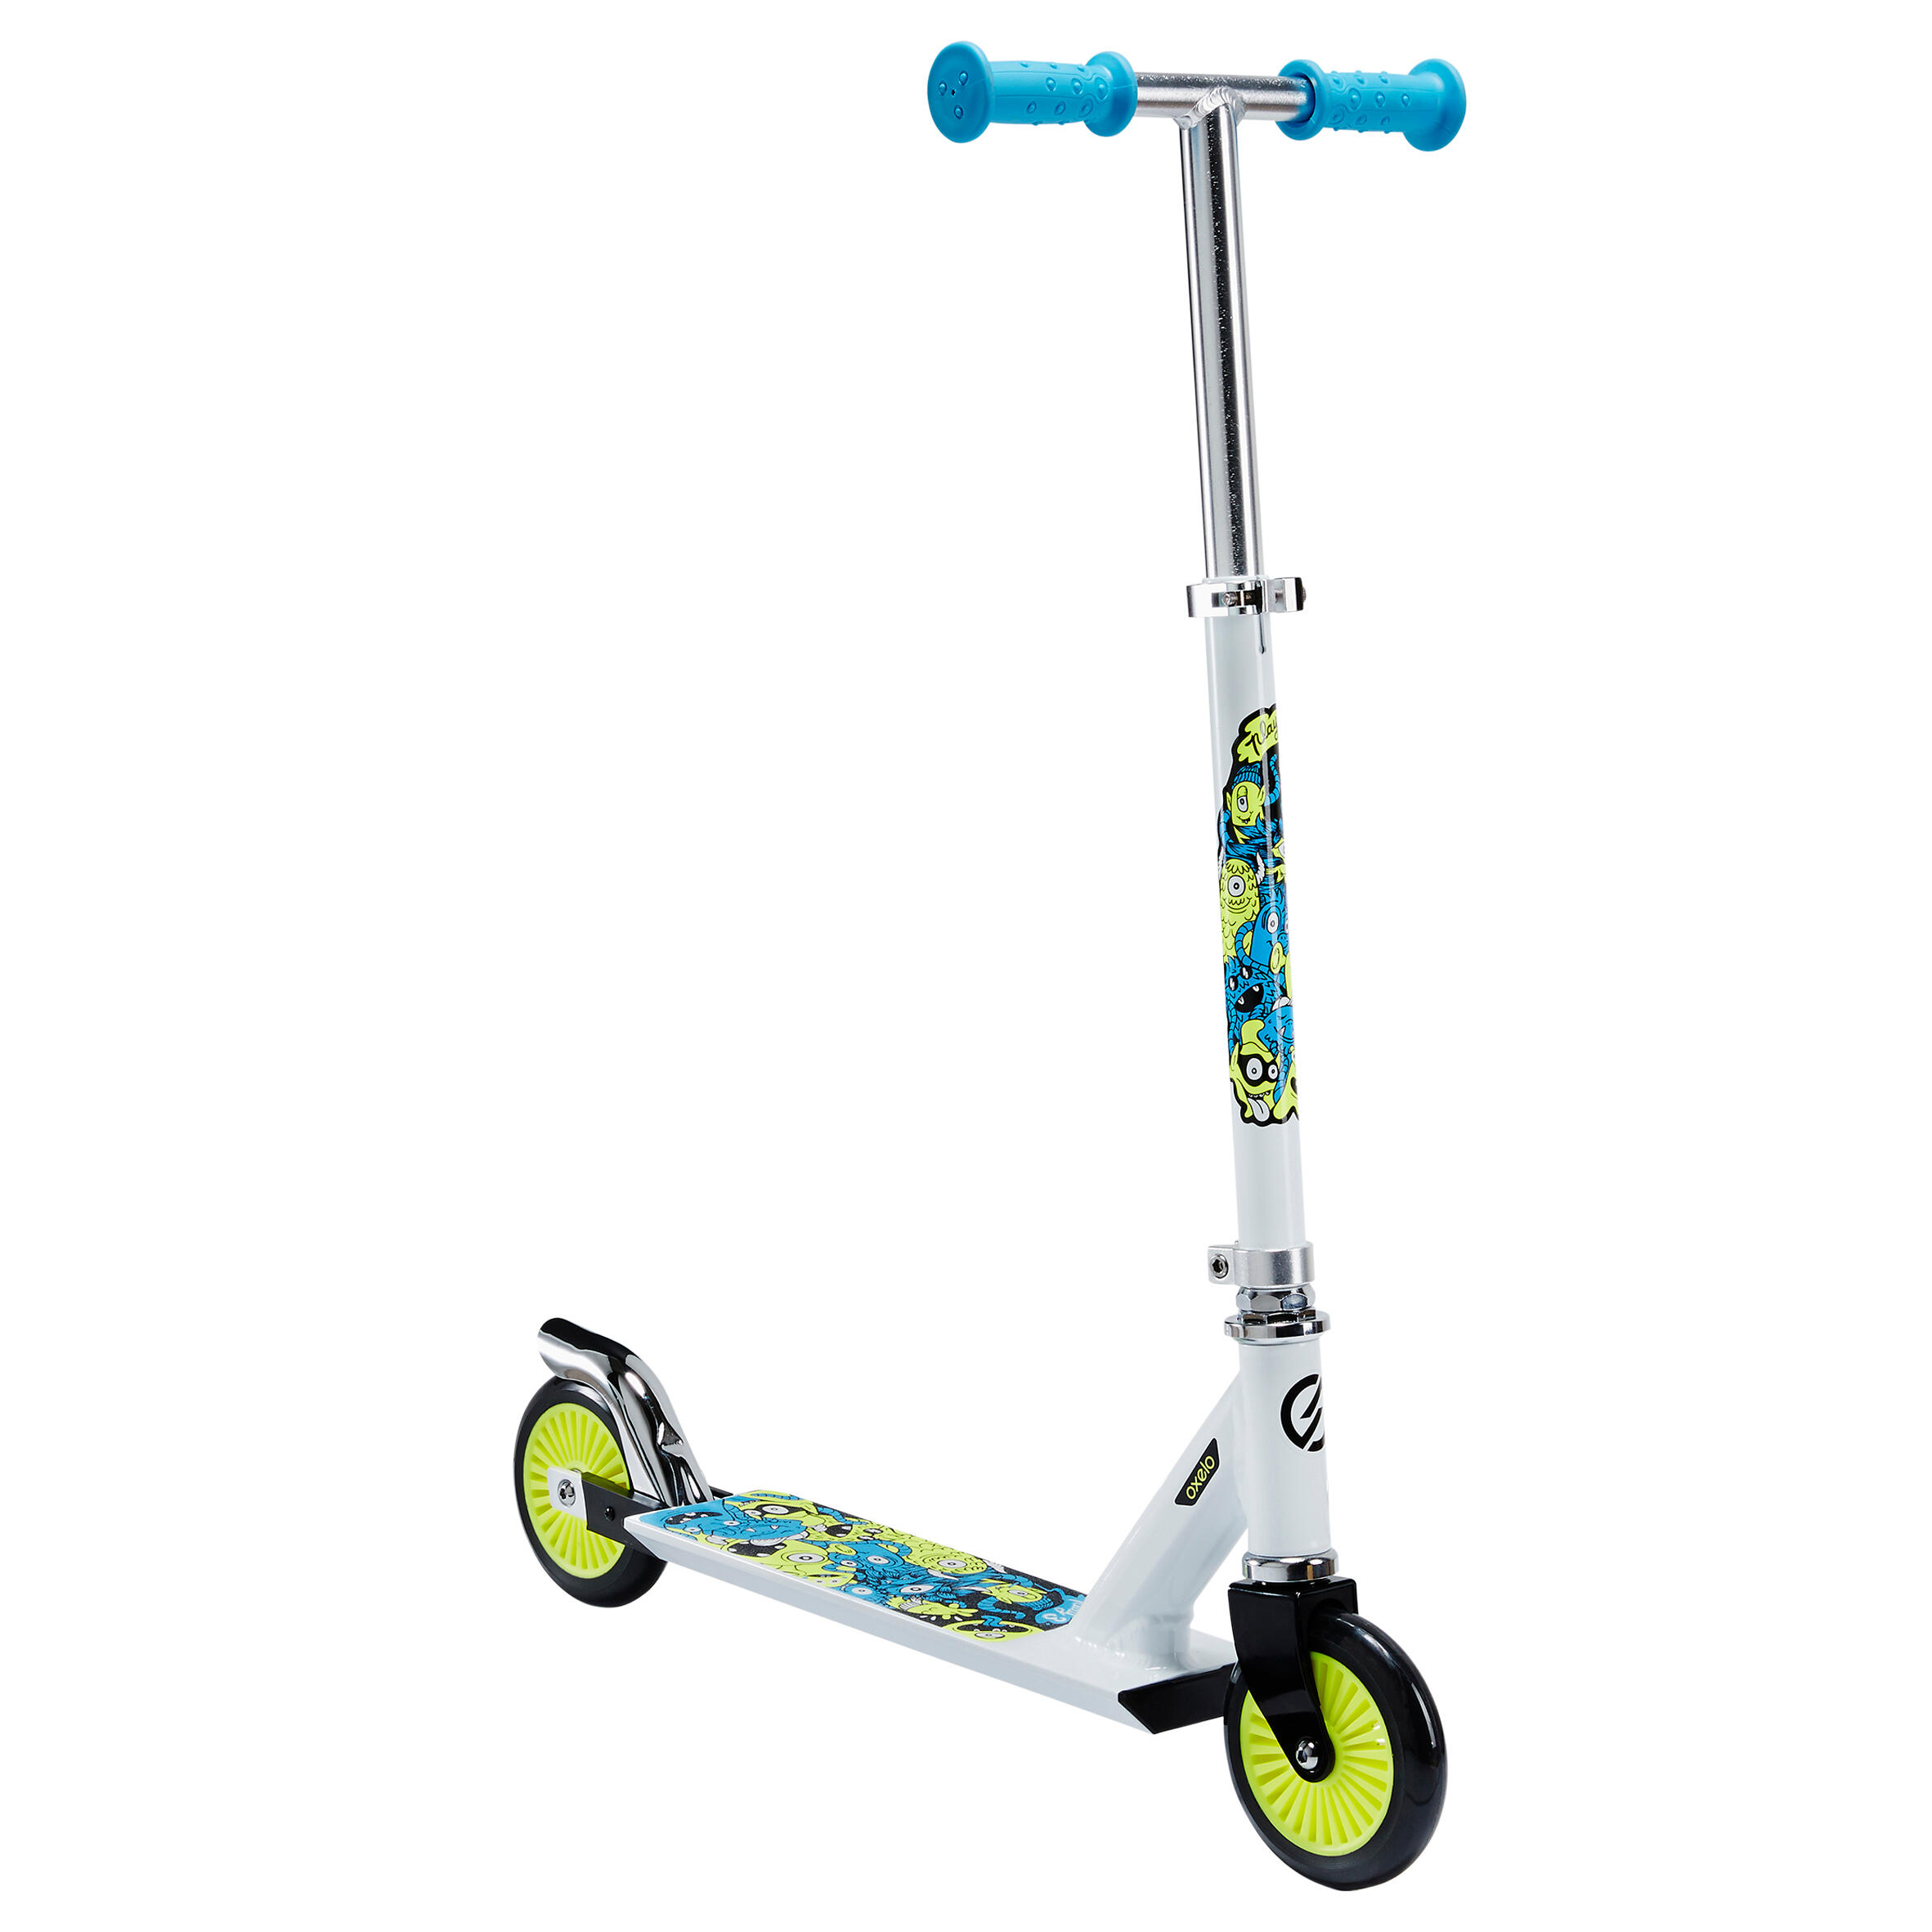 Kids' Scooter Play 3 - White/Neon